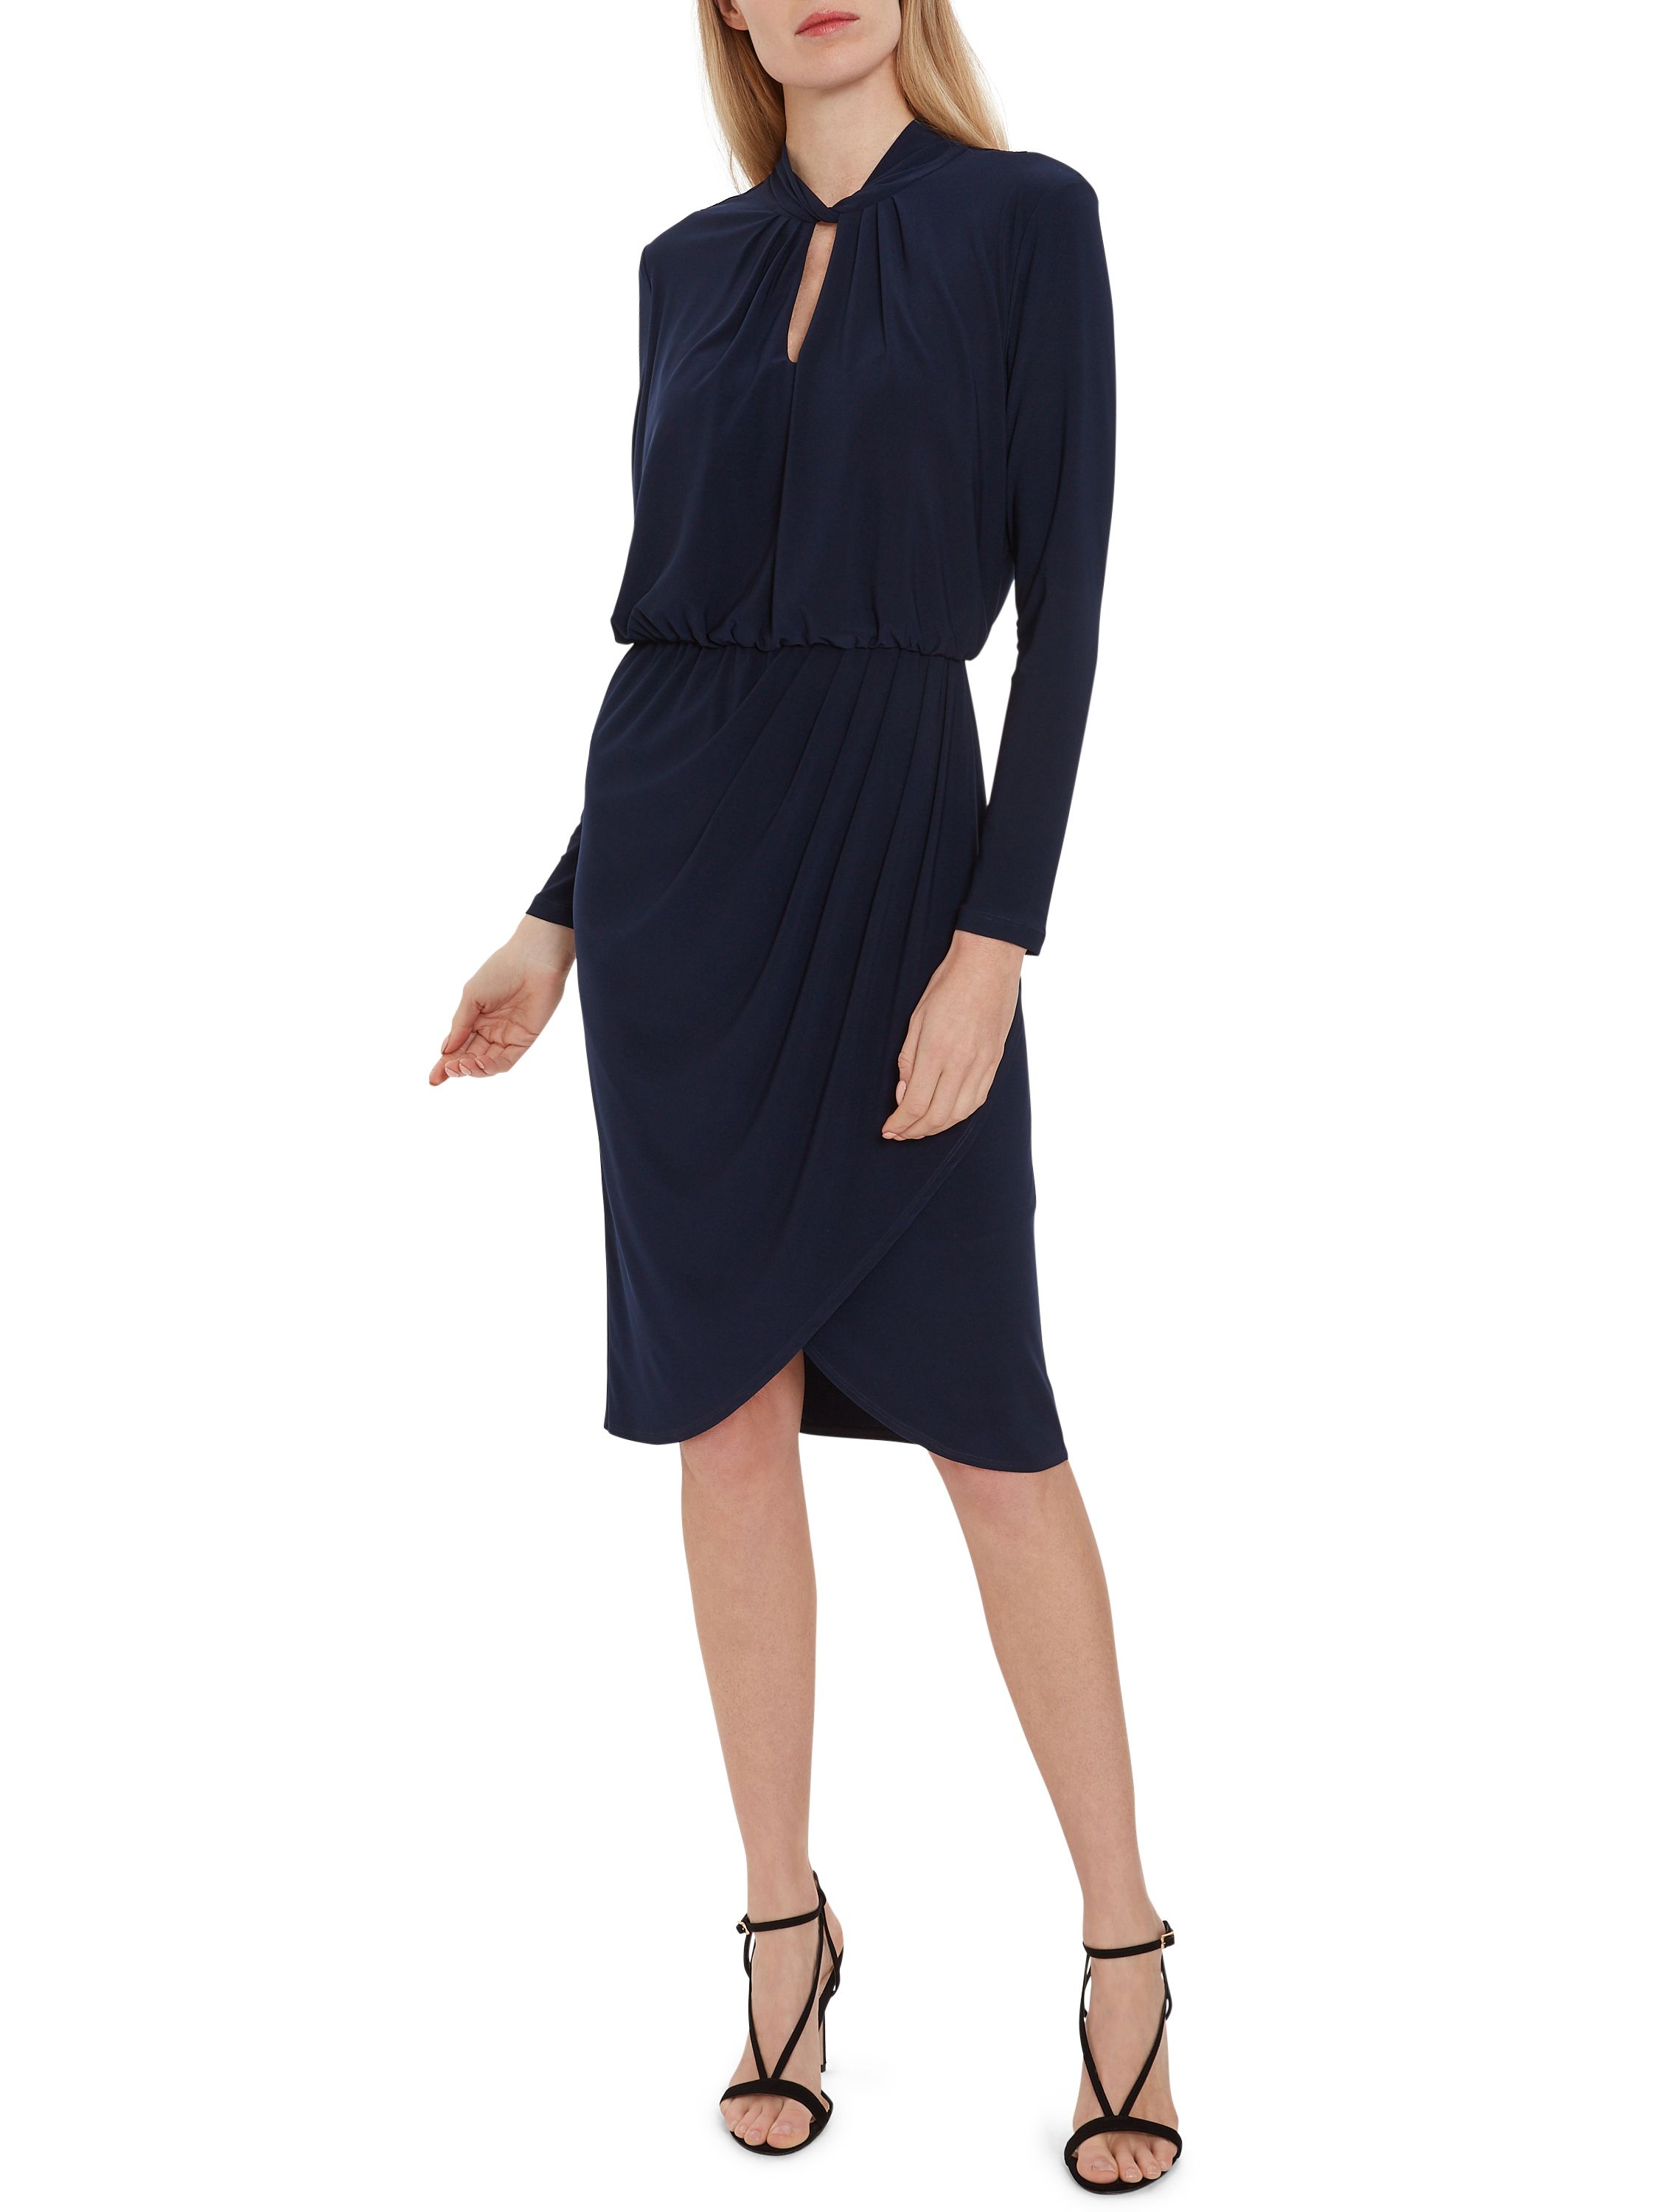 Feel fabulous in this soft stretch jersey dress by Gina Bacconi. It has long sleeves and keyhole neck detailing, with delicate ruching at the waistline and a wrap over style finish. Perfect for day to evening wear. The dress is fully lined.